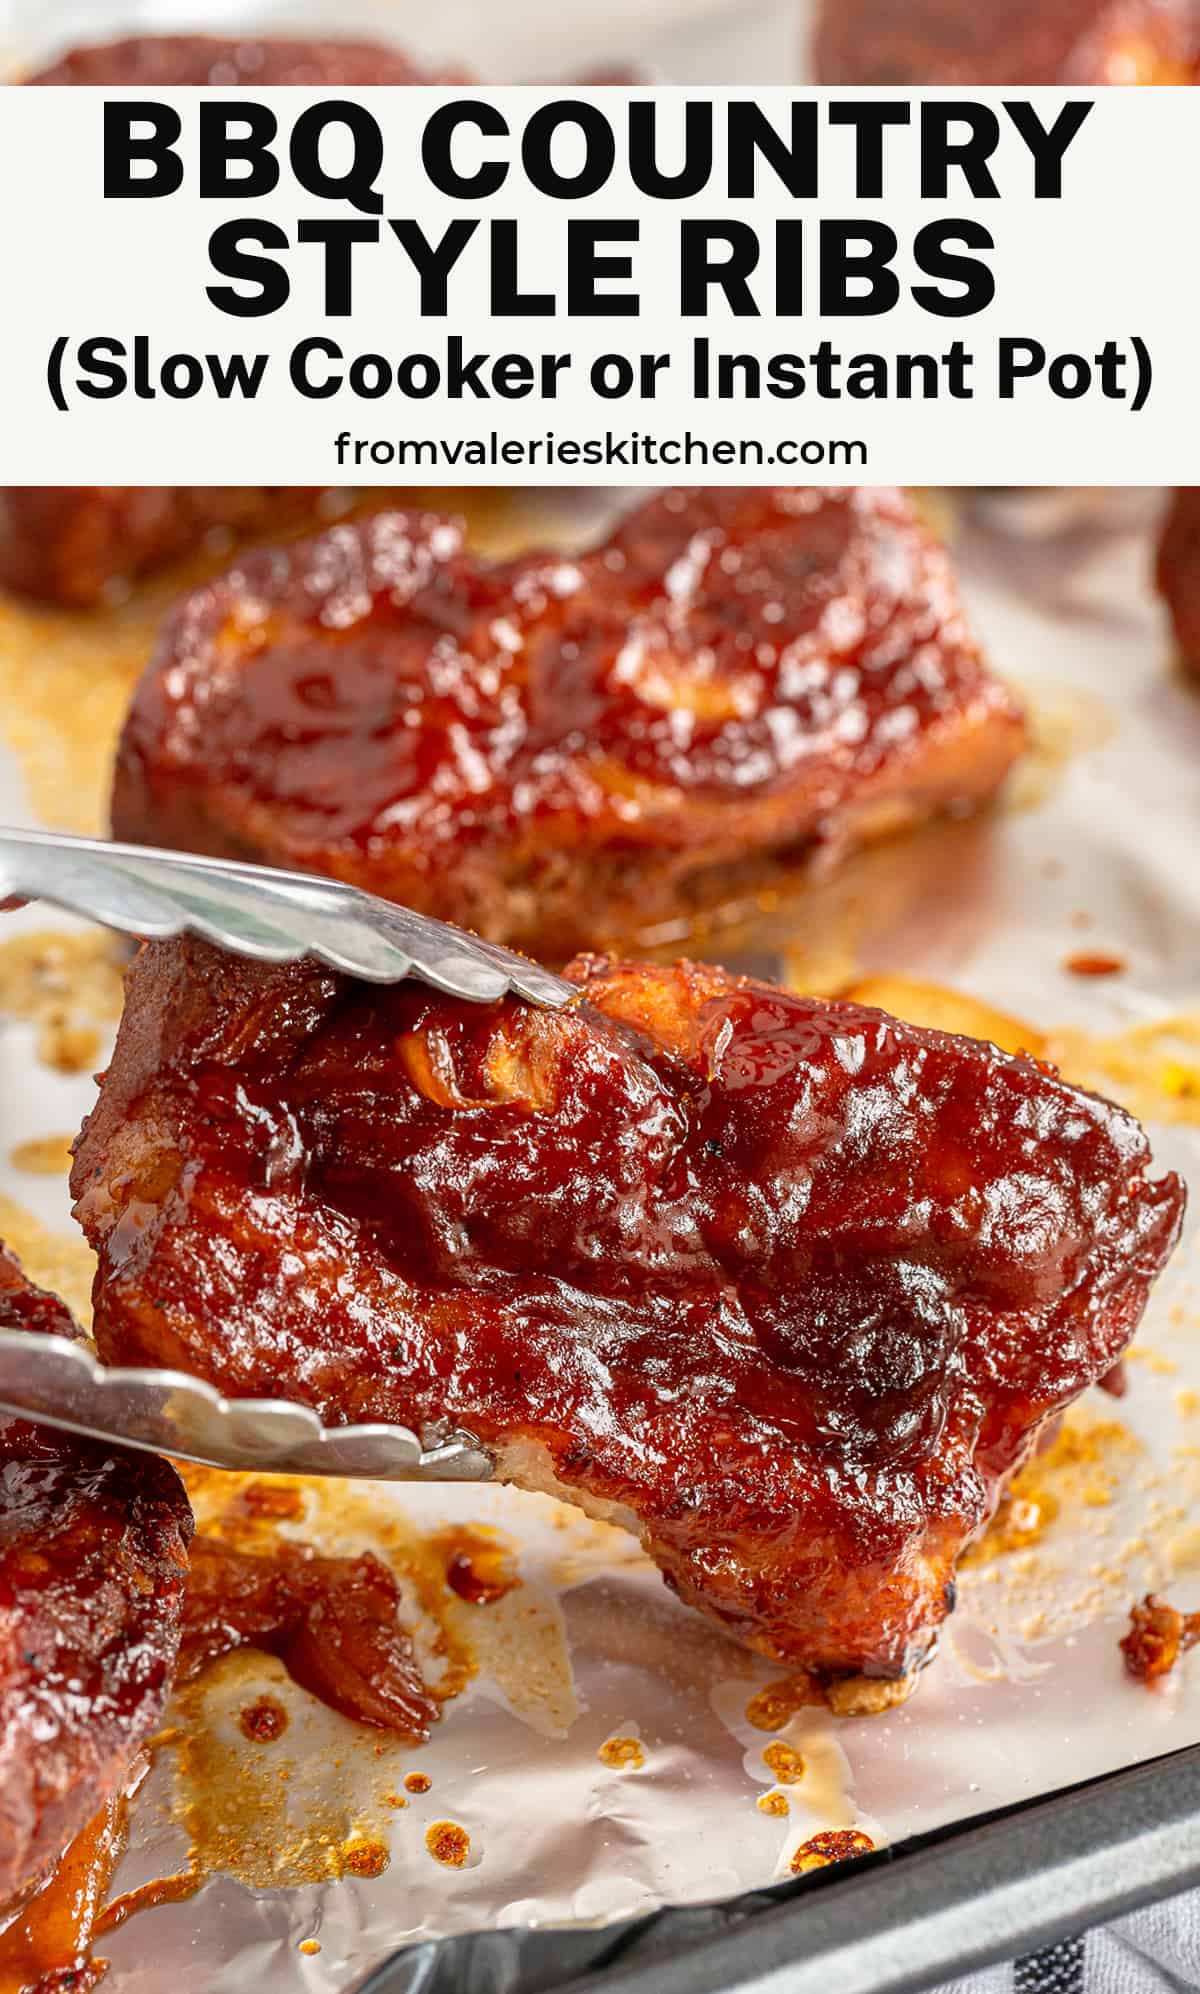 Tongs holding a country style rib with BBQ sauce with text overlay.